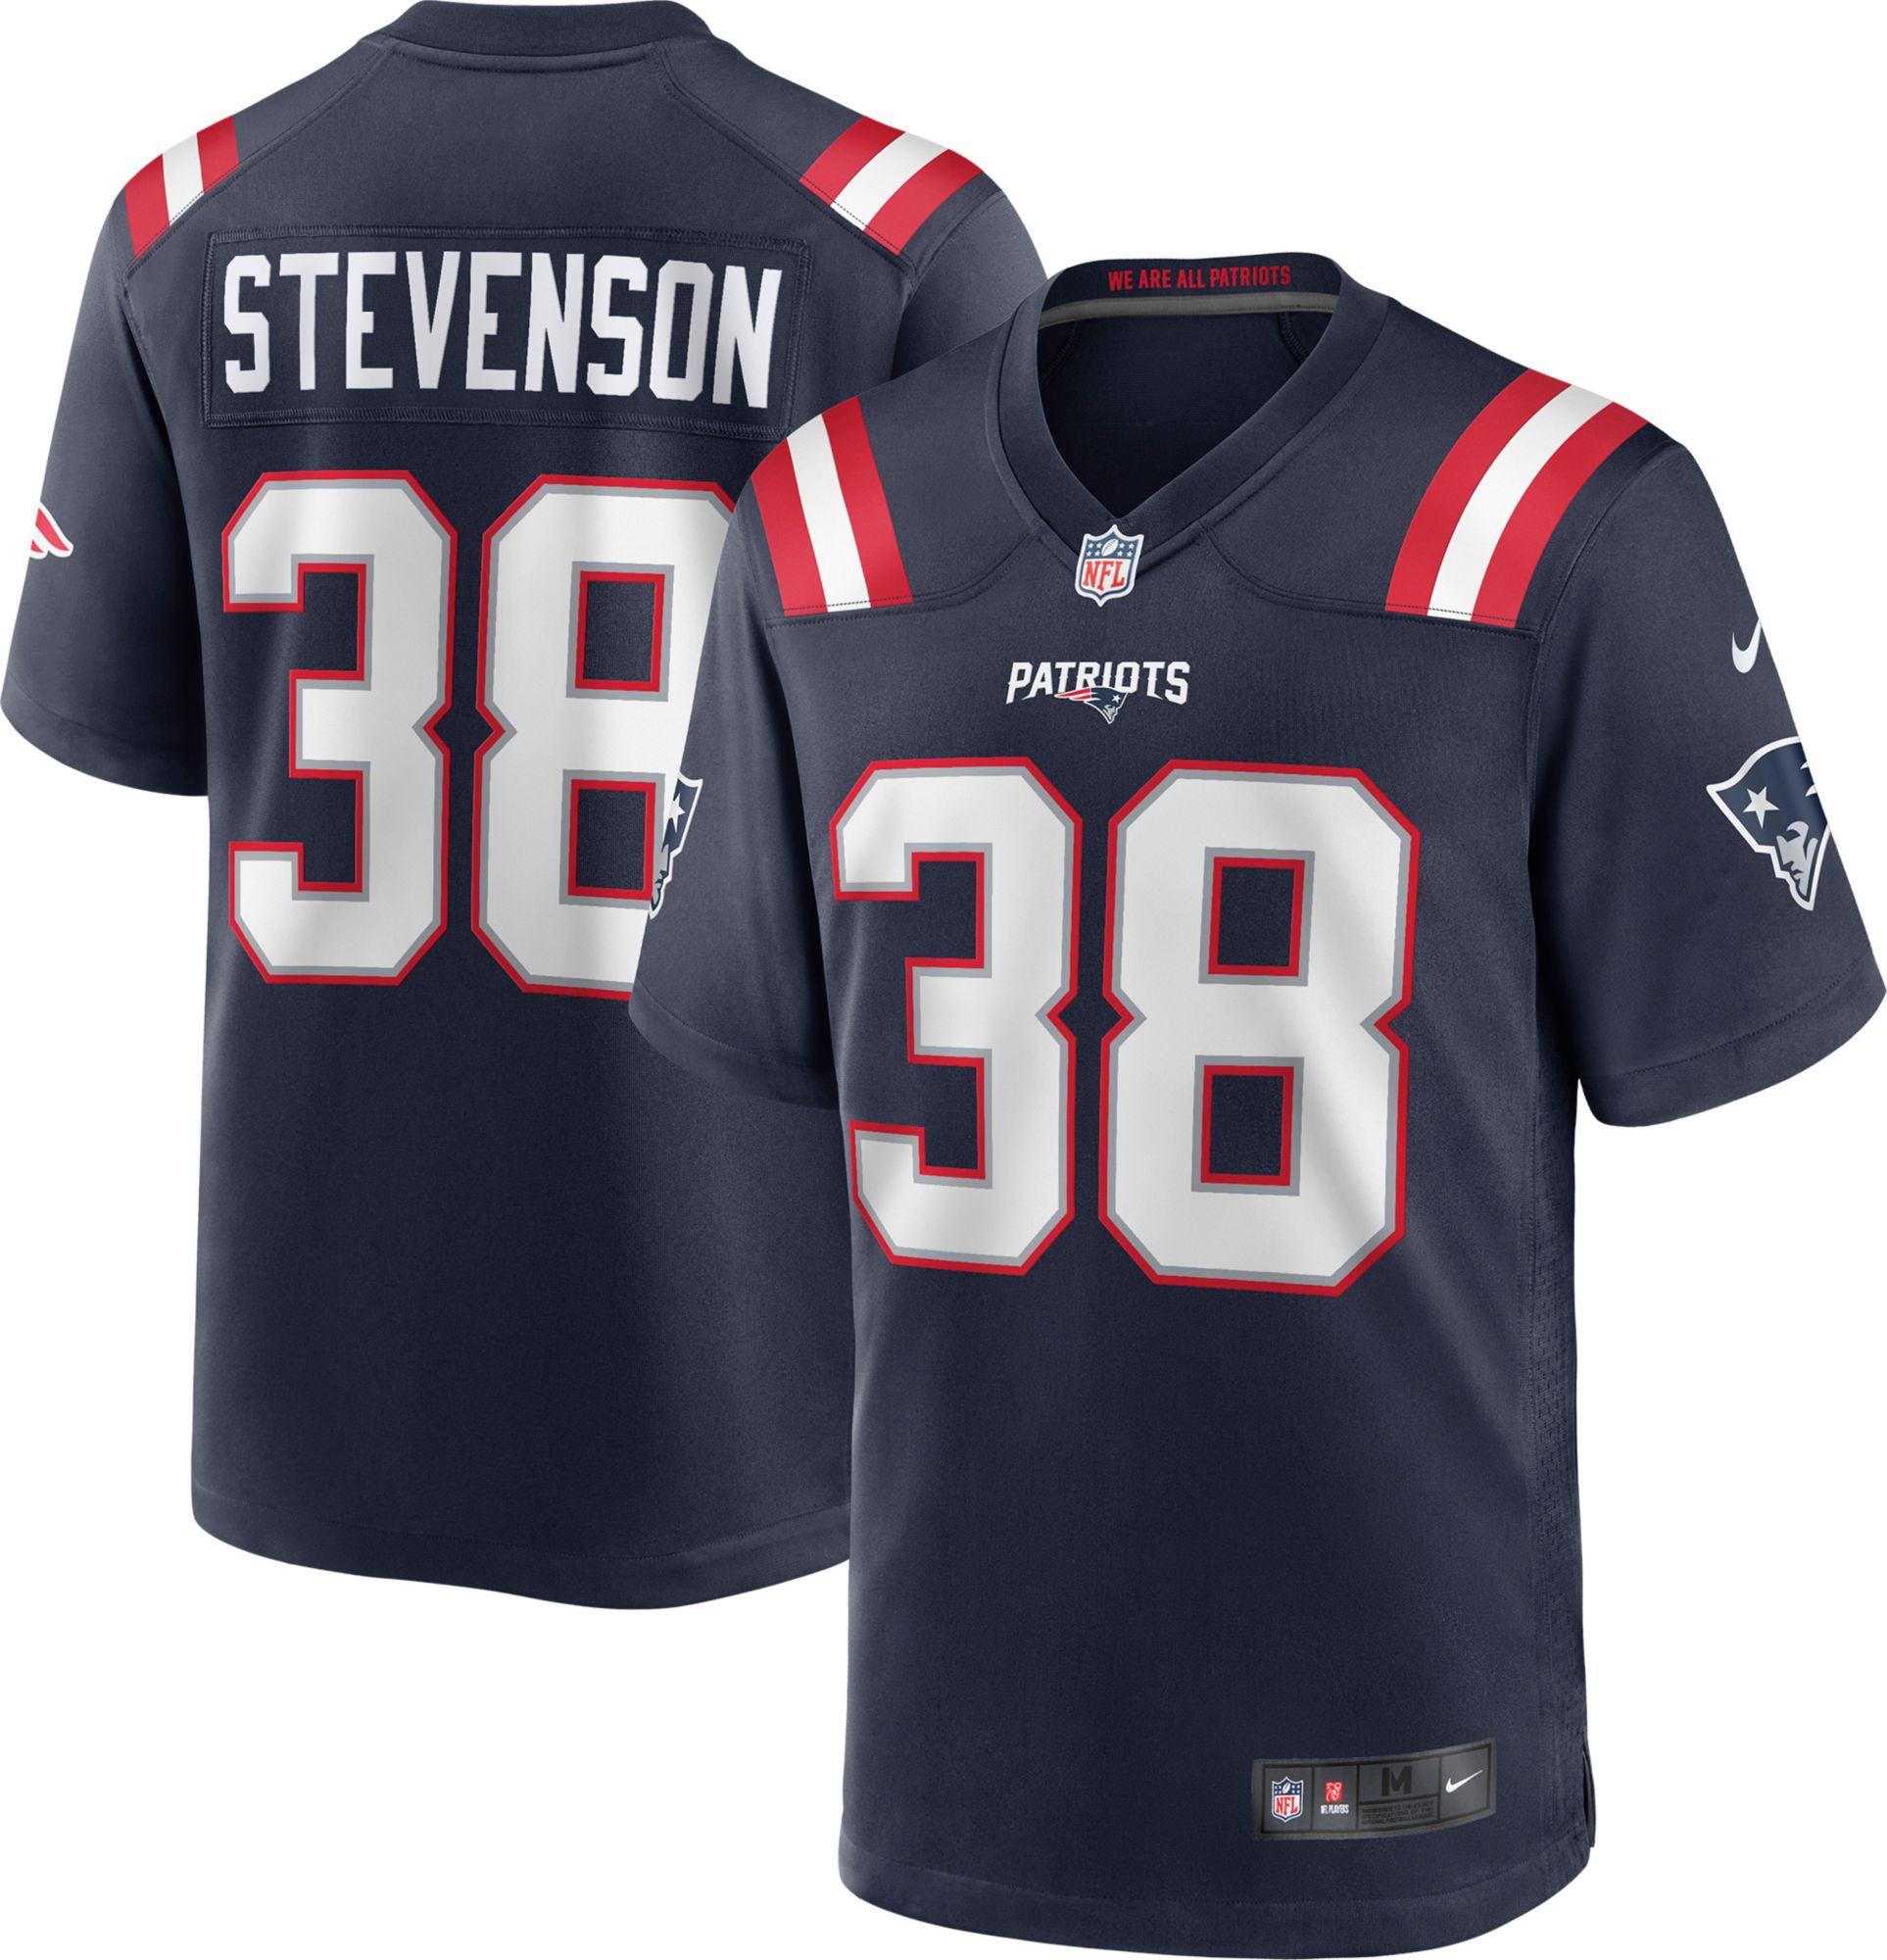 New patriots jersey. Will they wear this on the field? These were at dicks  today : r/Patriots